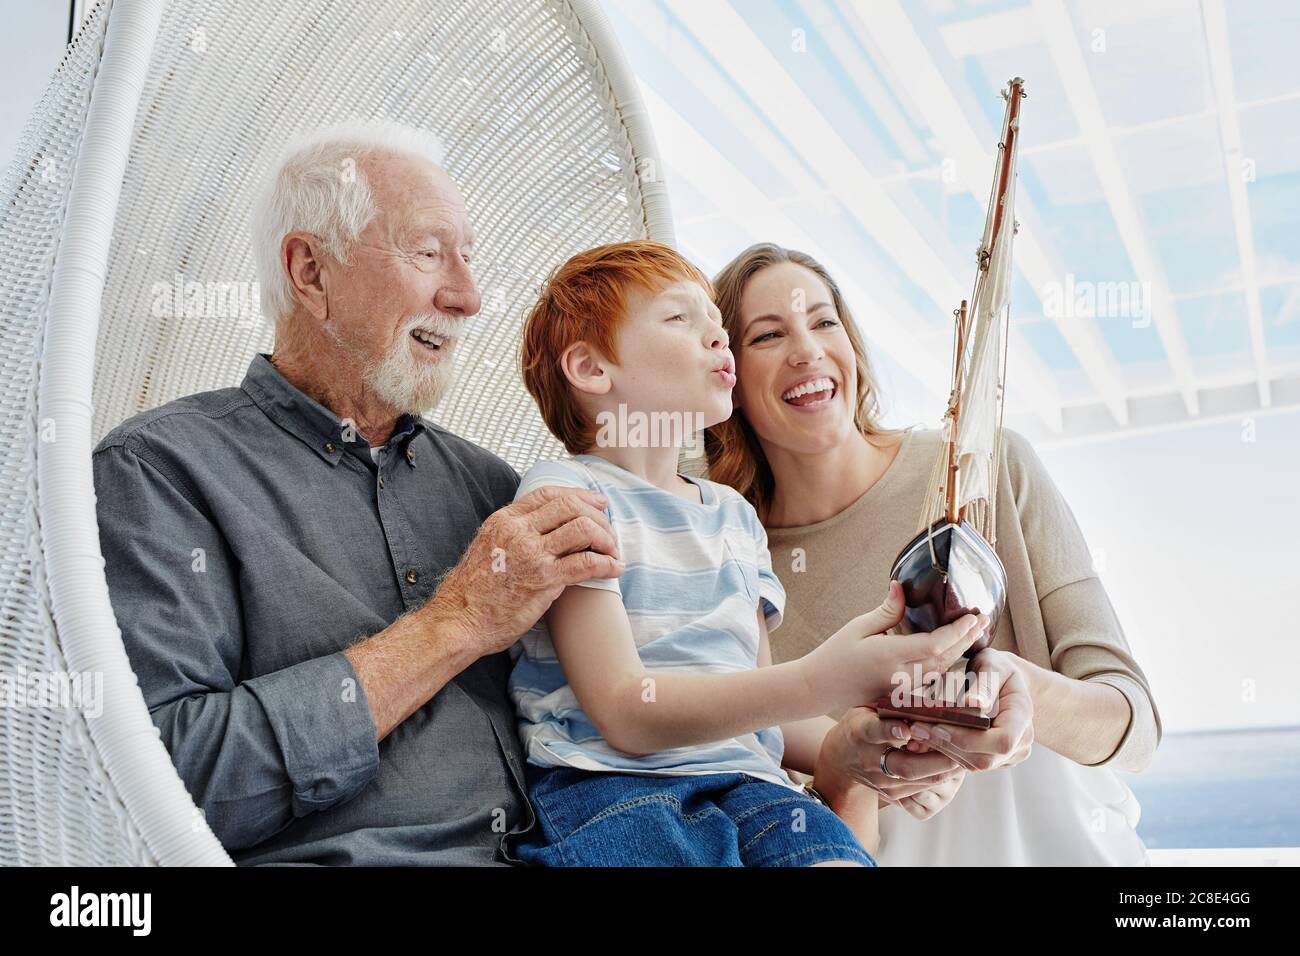 Happy grandfather, mother and son with model sailing ship in hanging chair Stock Photo